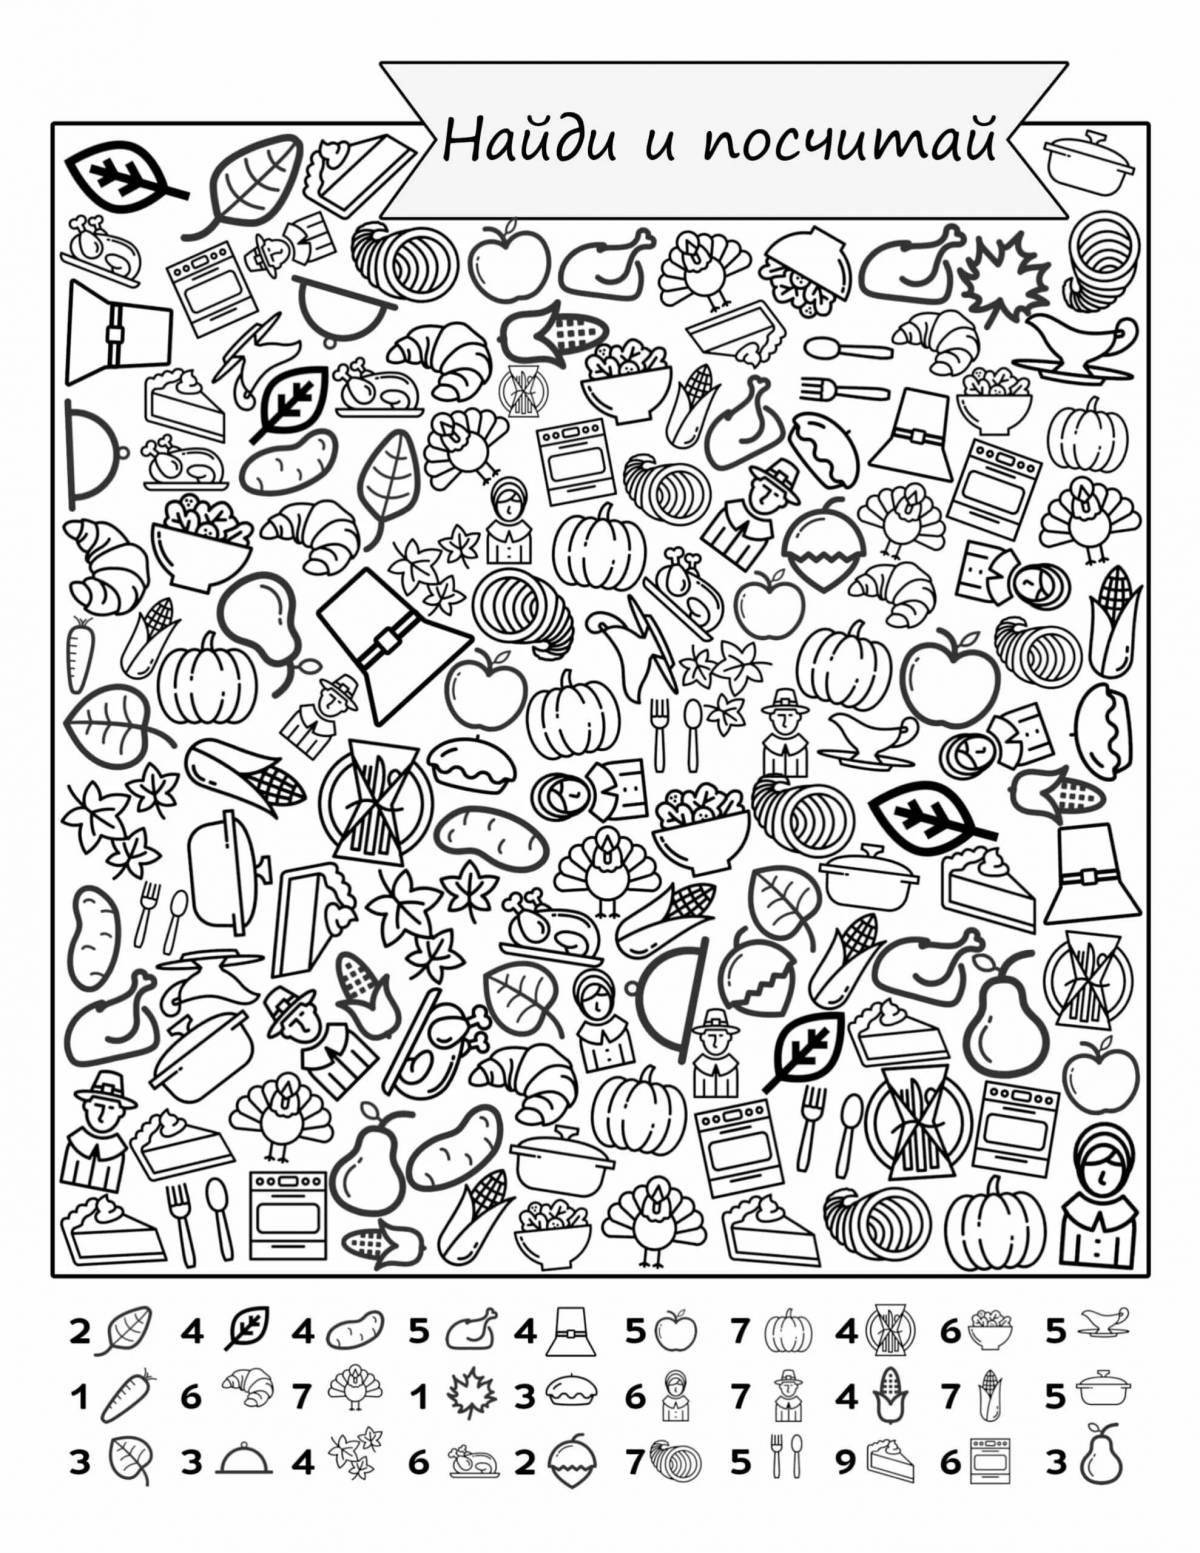 Joyful coloring pages to practice mindfulness